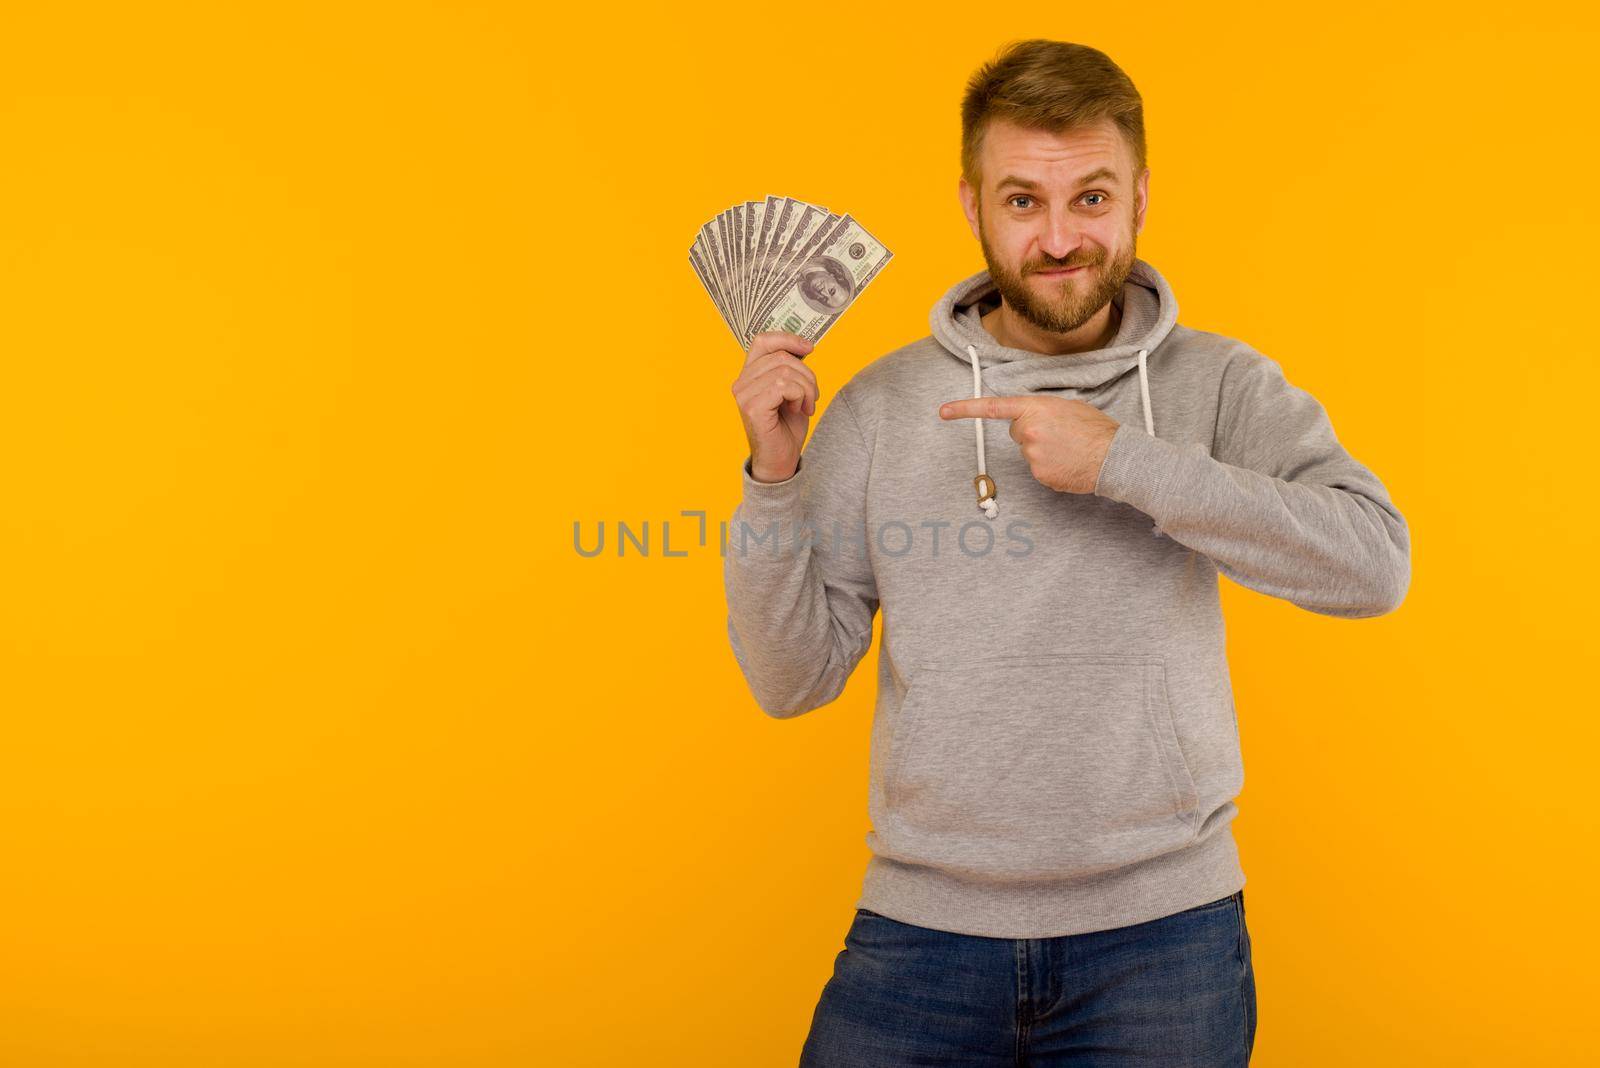 Joyful man in a gray hoodie points a finger at money dollars on a yellow background - image